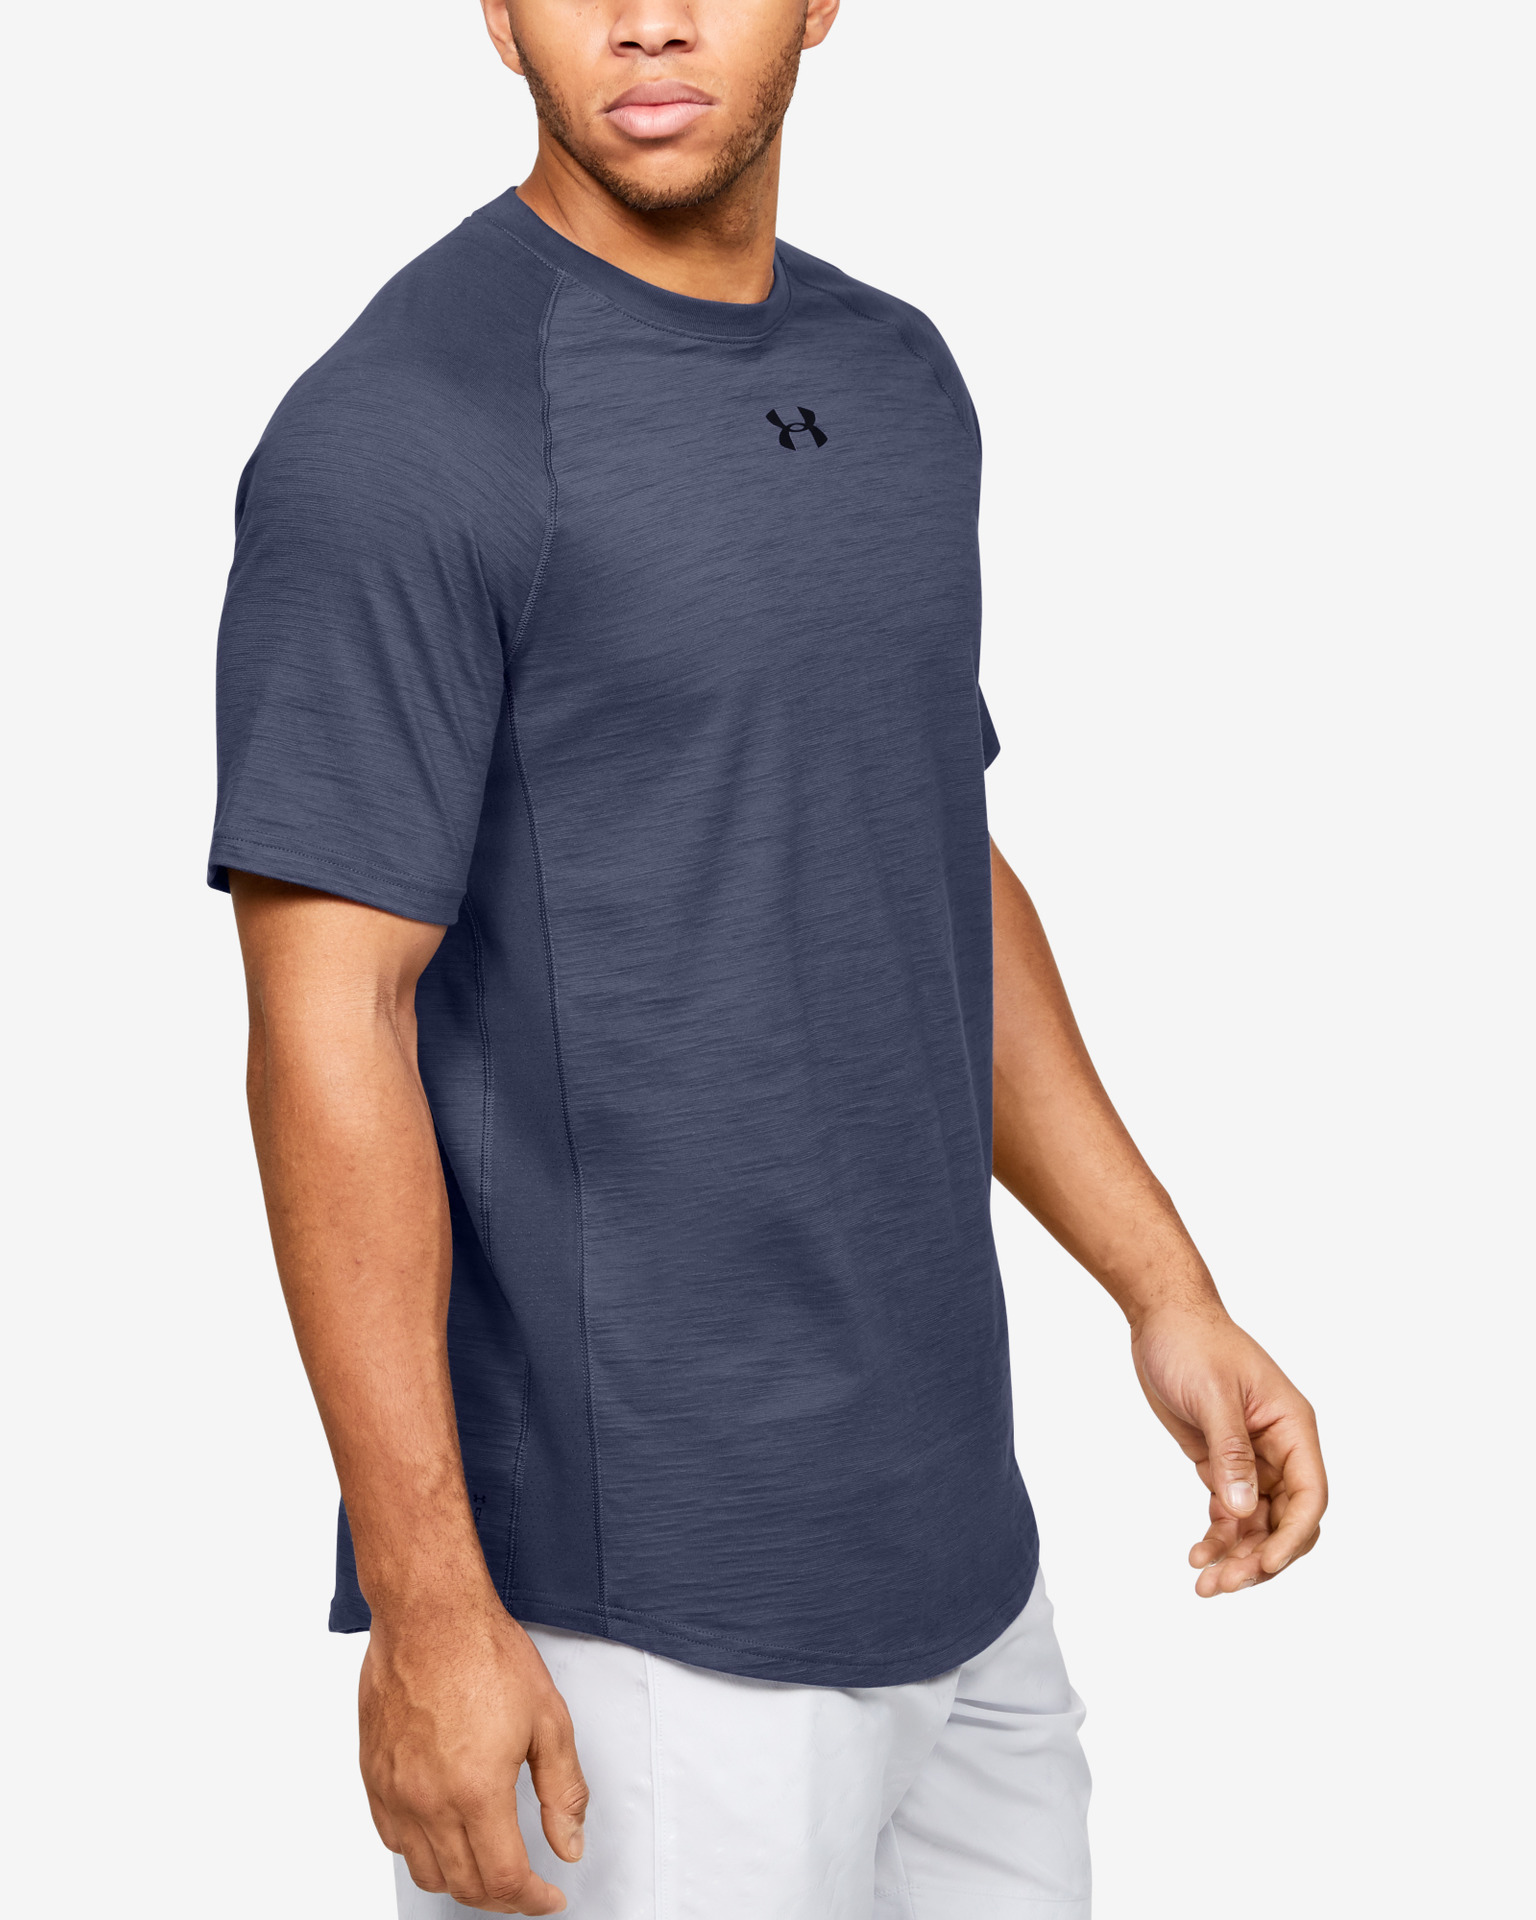 Under Armour - Charged Cotton® T-shirt